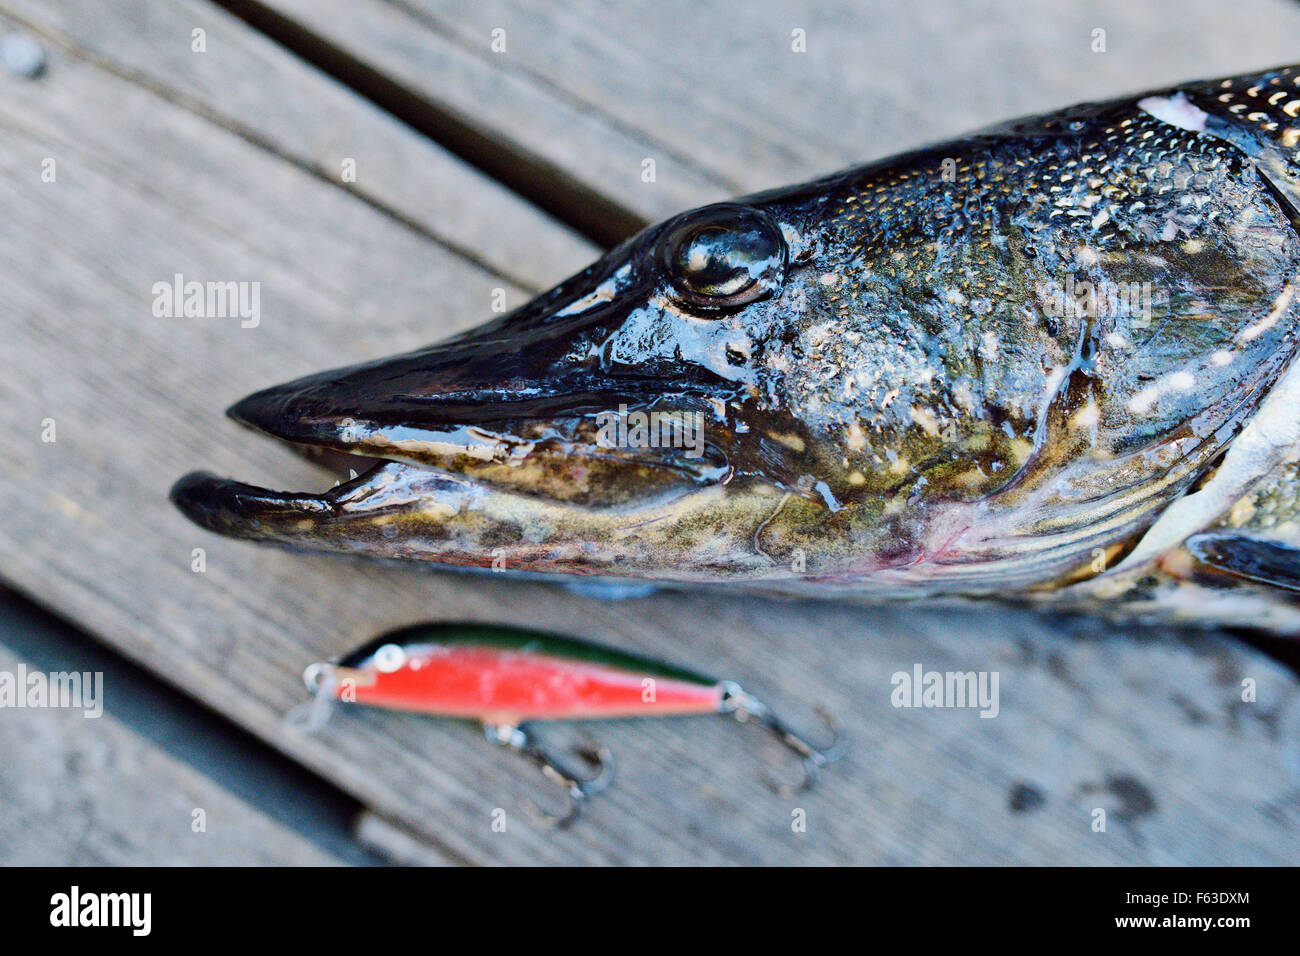 Northern pike is a common catch in Finland. Lentua lake, Kuhmo, Finland. Stock Photo